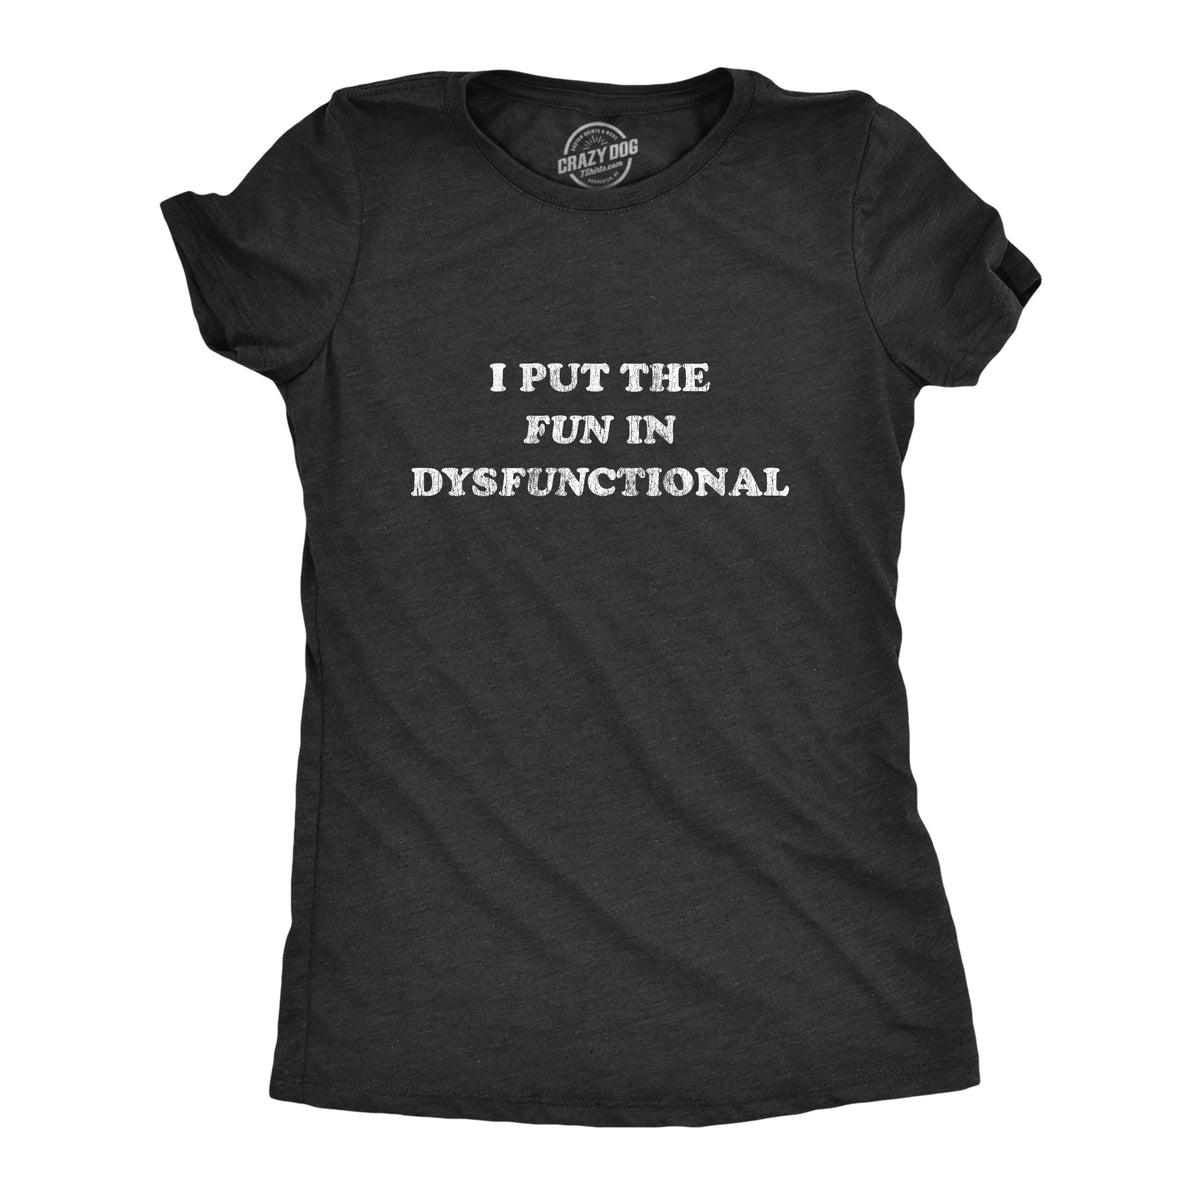 Funny Heather Black I Put The Fun In Dysfunctional Womens T Shirt Nerdy Valentine&#39;s Day Sarcastic Tee